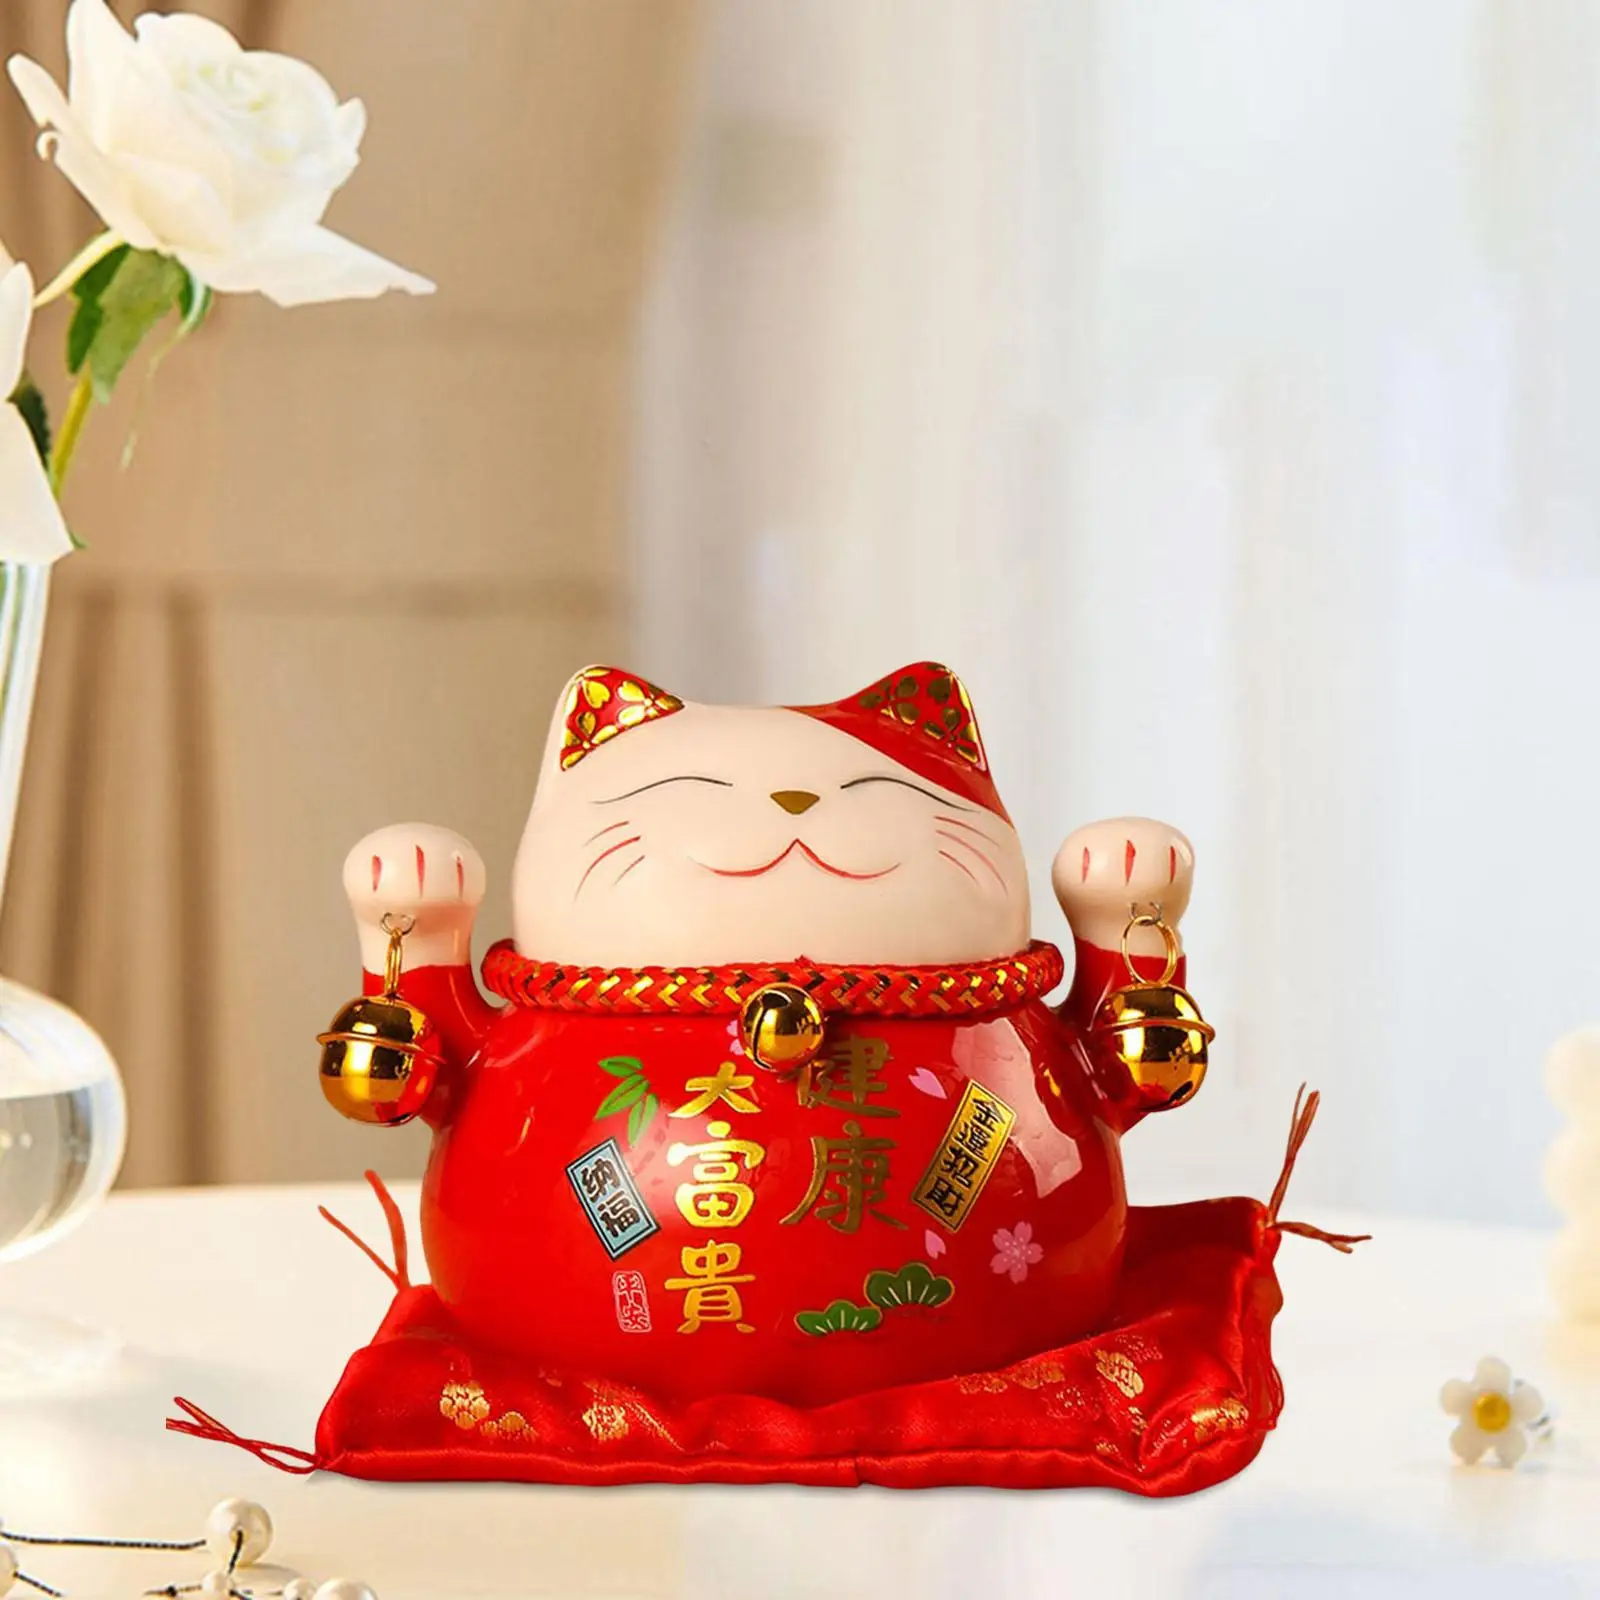 Ceramic Lucky Cat Money Bank Figurines with Bell Decorative Crafts Storage Home Decor Chinese Style for Tabletop Business Gift